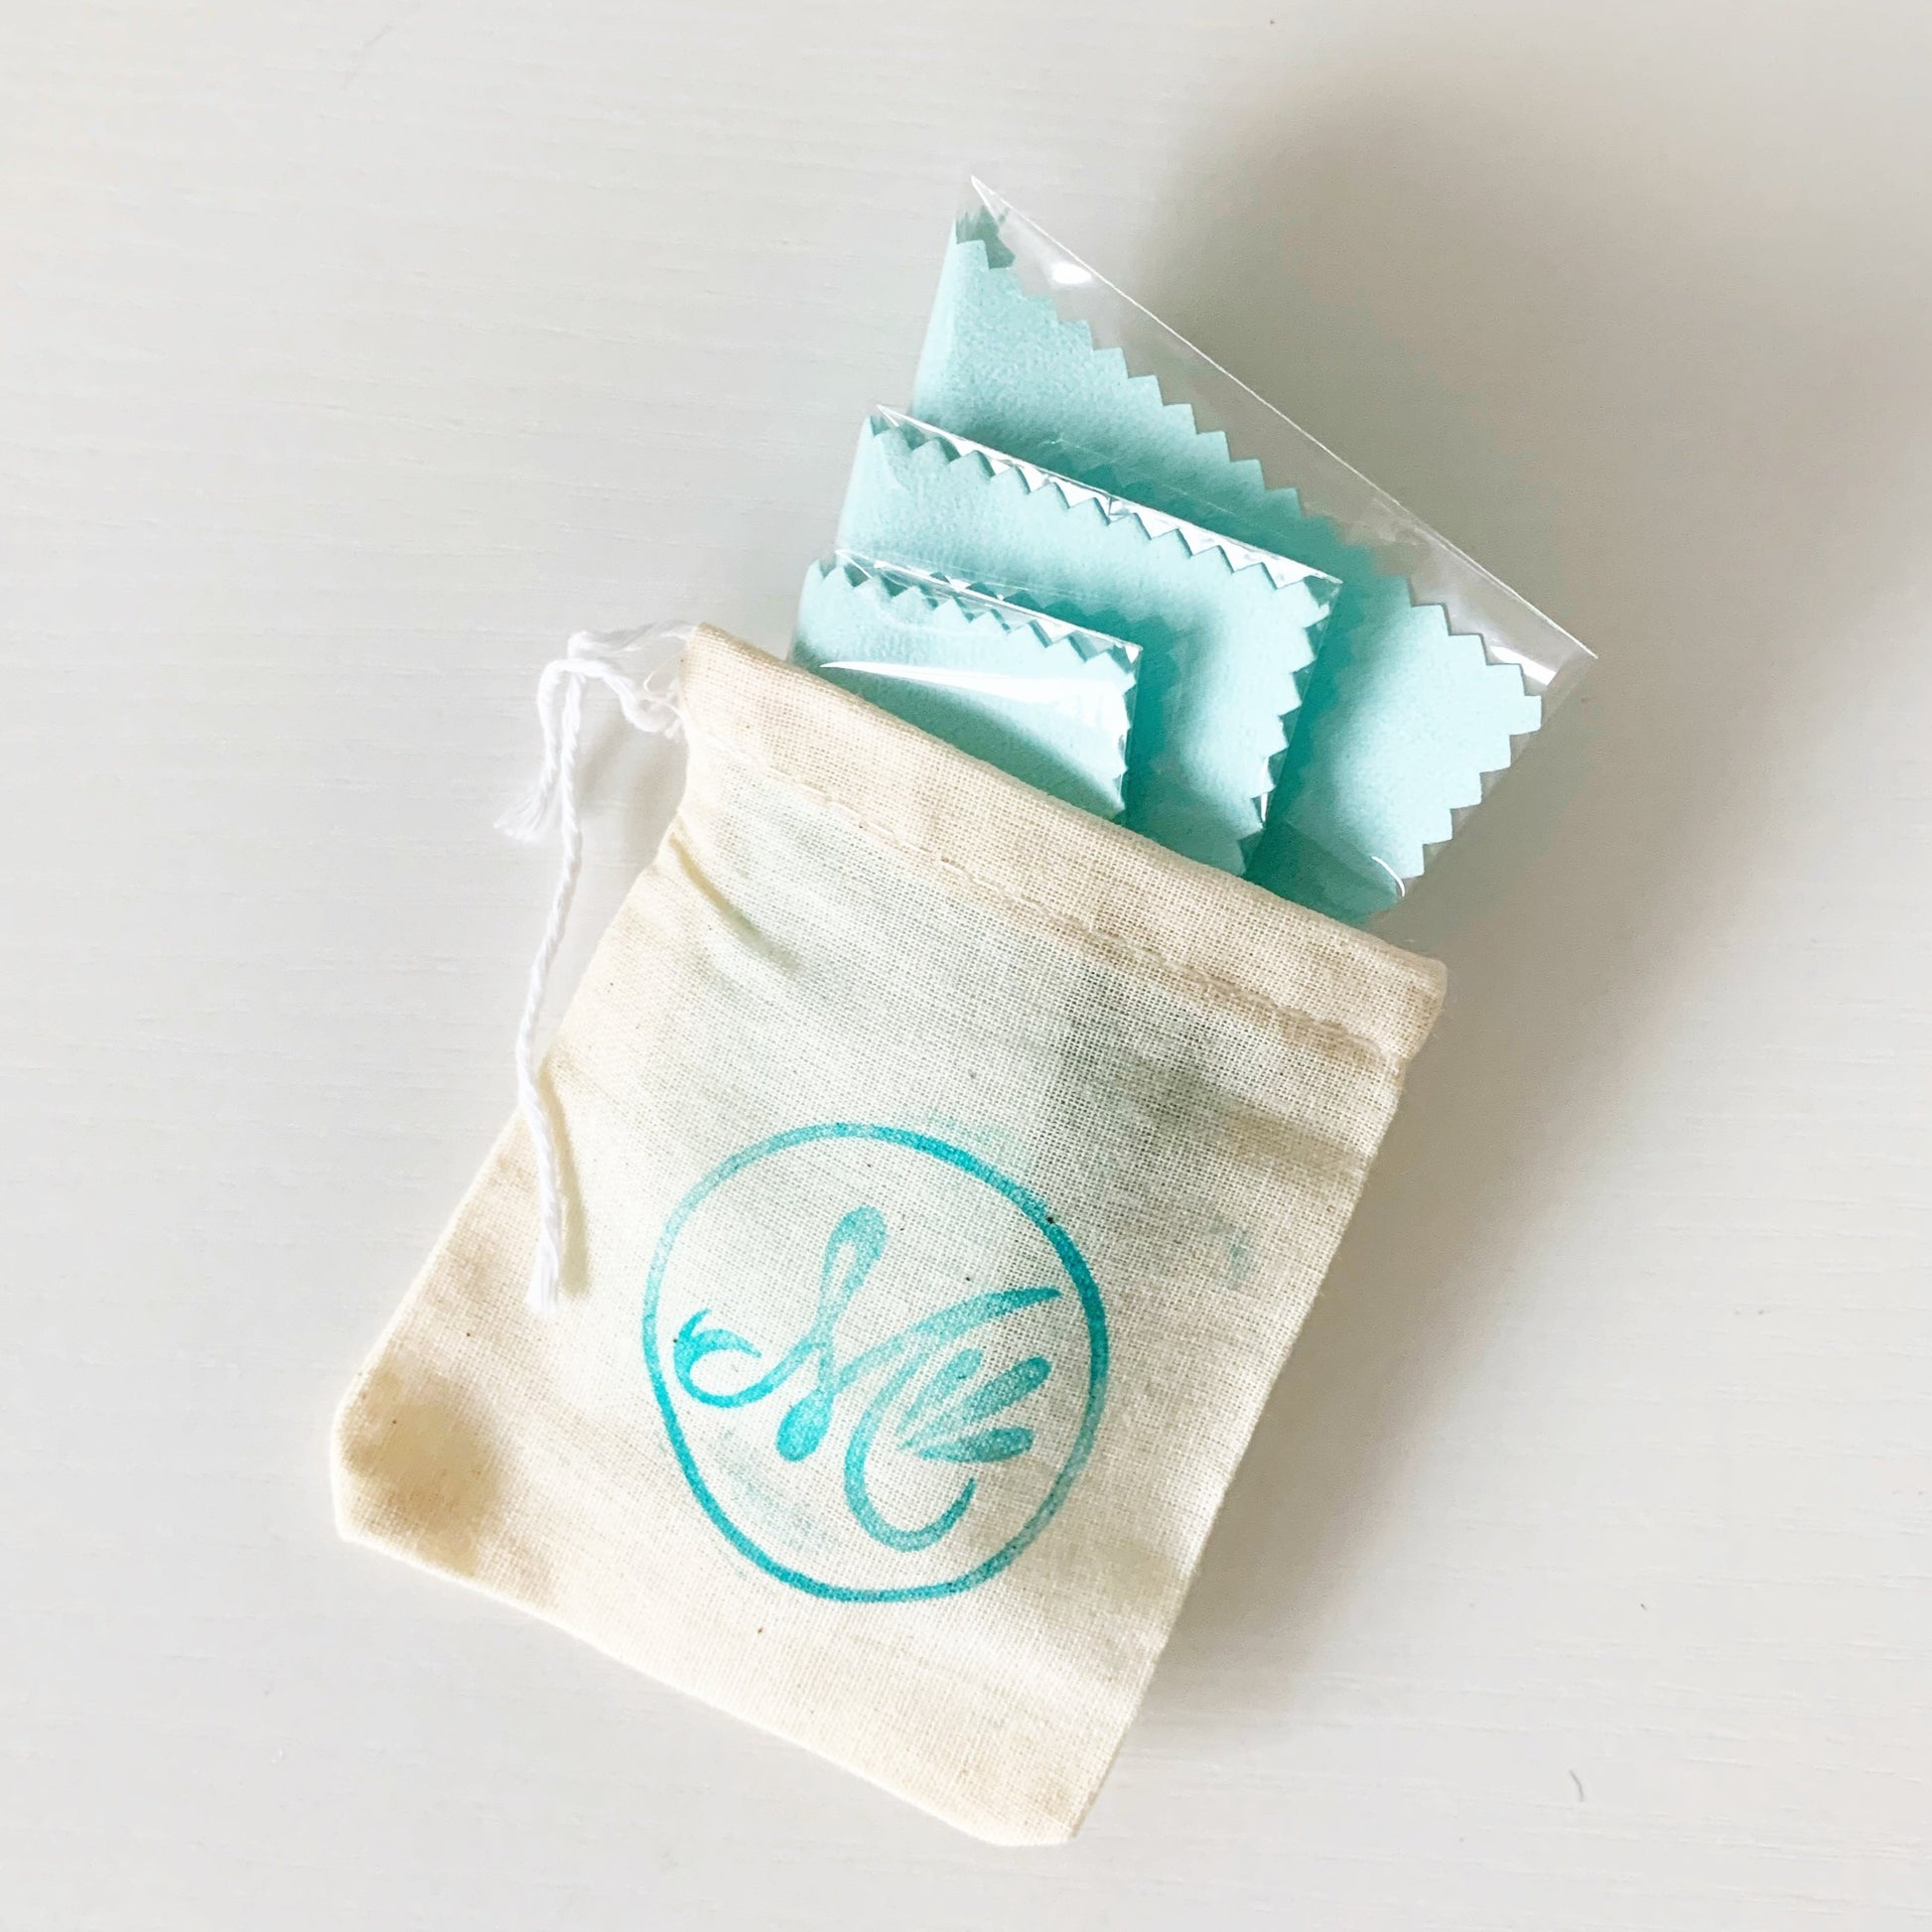 photograph of 3 light aqua jewelry polishing cloths folded into a mermaids and madeleines logo stamped cotton pouch. all photographed on a white surface